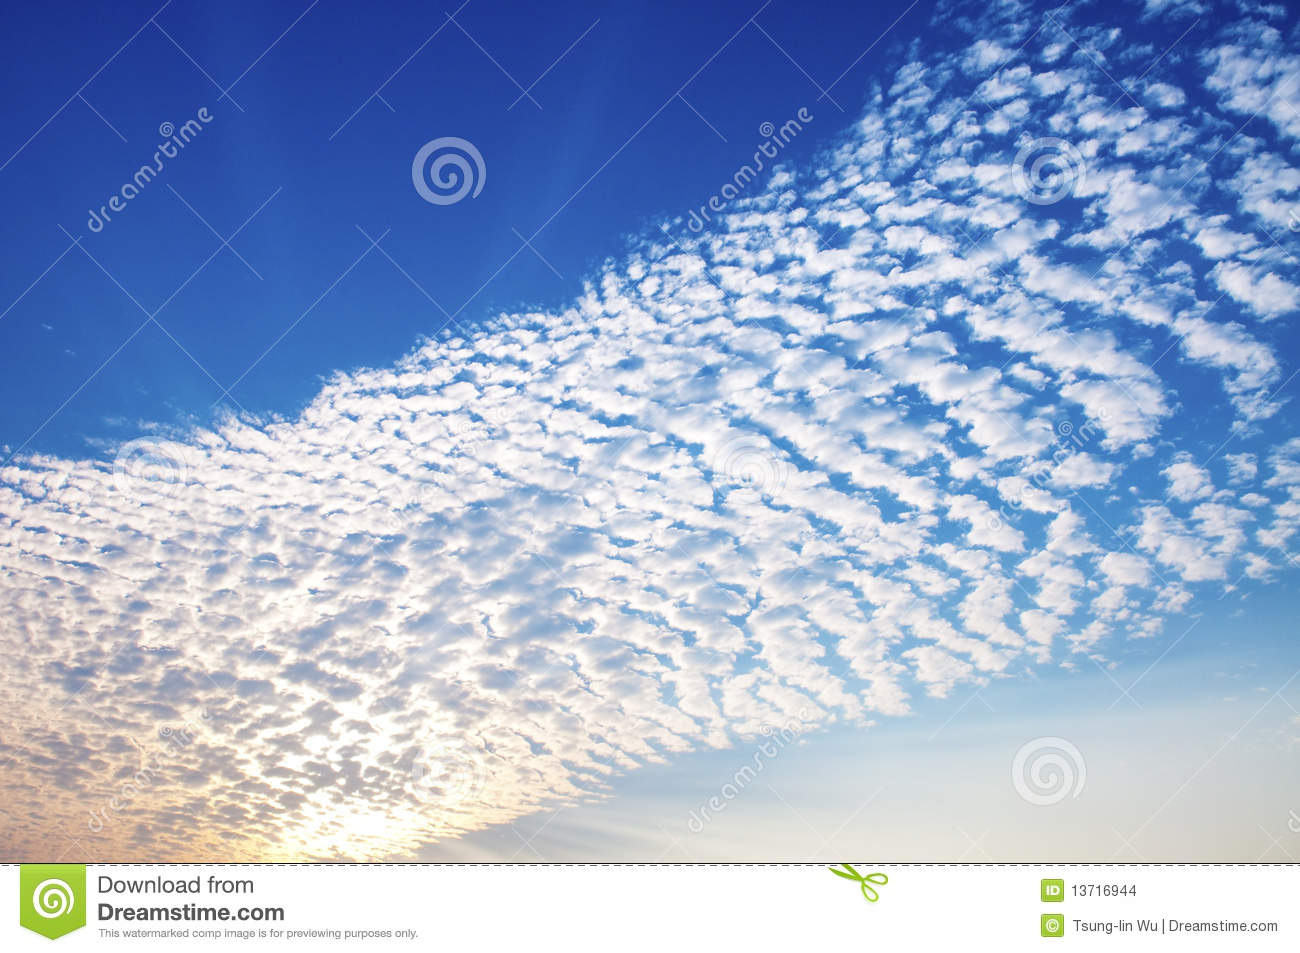 Cirrus Clouds With Colorful Sky And Beam Of Sunlight 